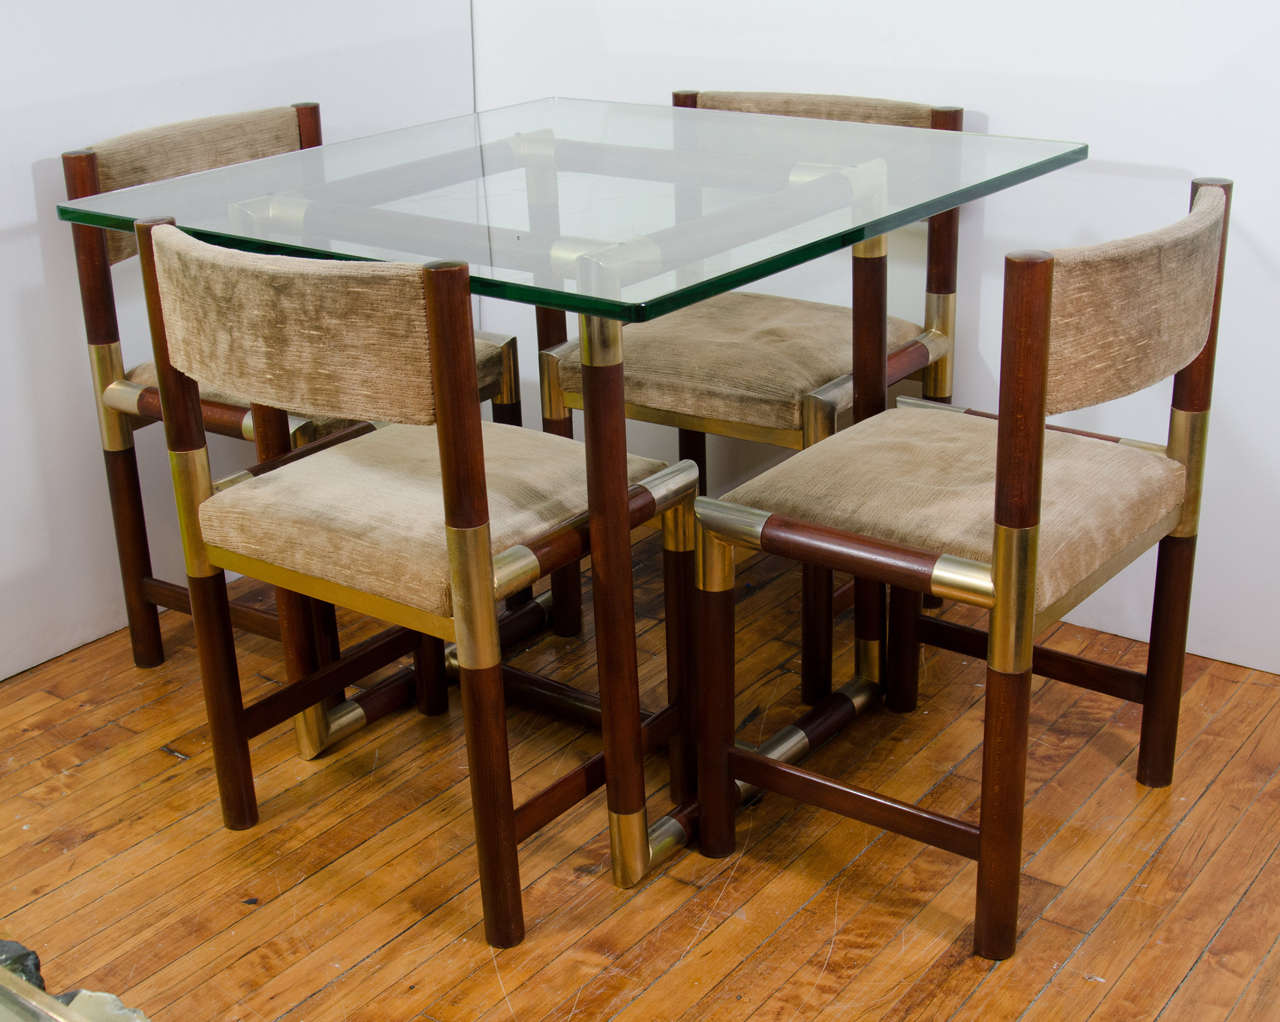 A vintage French small glass dining room table with tubular wood frame, brass accents, and glass top.  Four matching chairs in original mocha colored upholstered.

Good vintage condition with age appropriate wear and patina.  Some scratches and